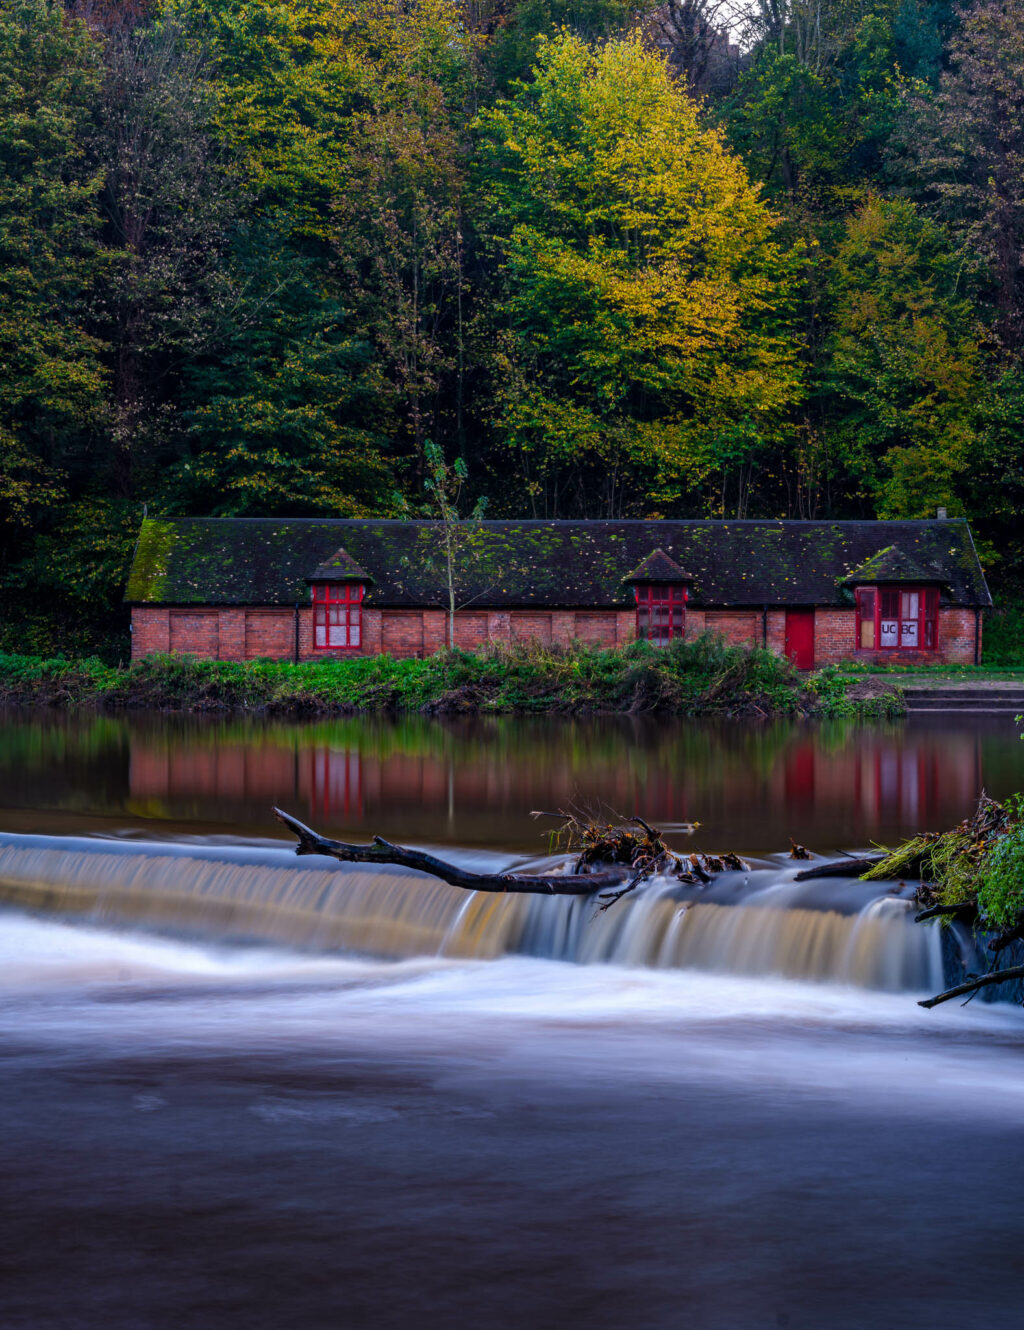 Old boathouse and weir on the River Wear at the height of autumn